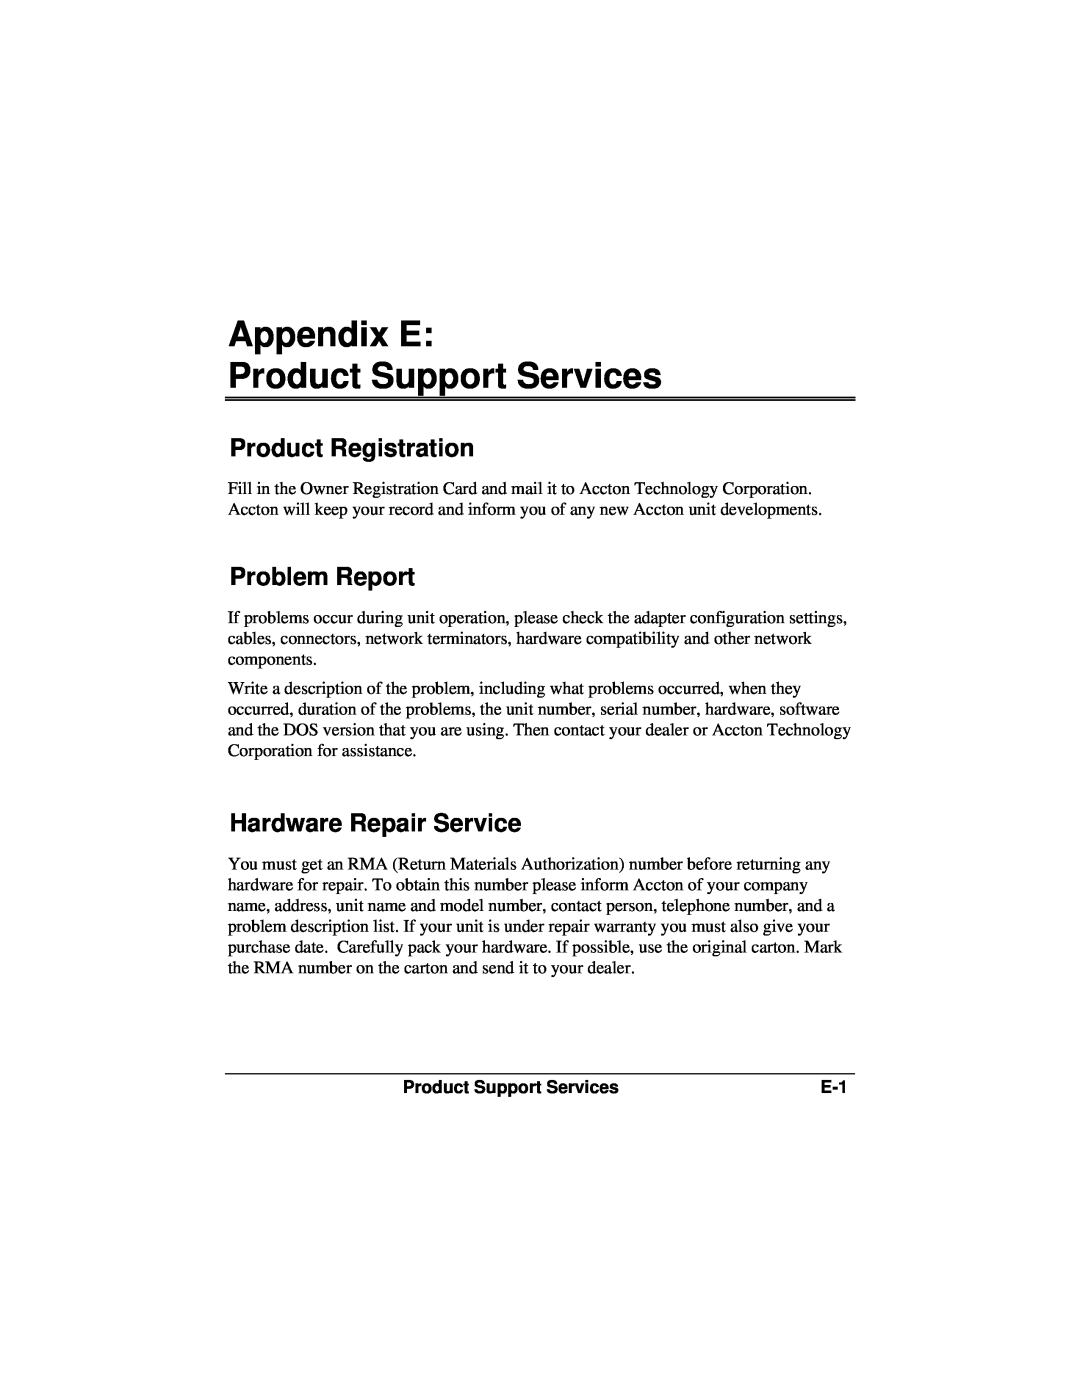 Accton Technology ES3002-TF manual Appendix E Product Support Services, Product Registration, Problem Report 